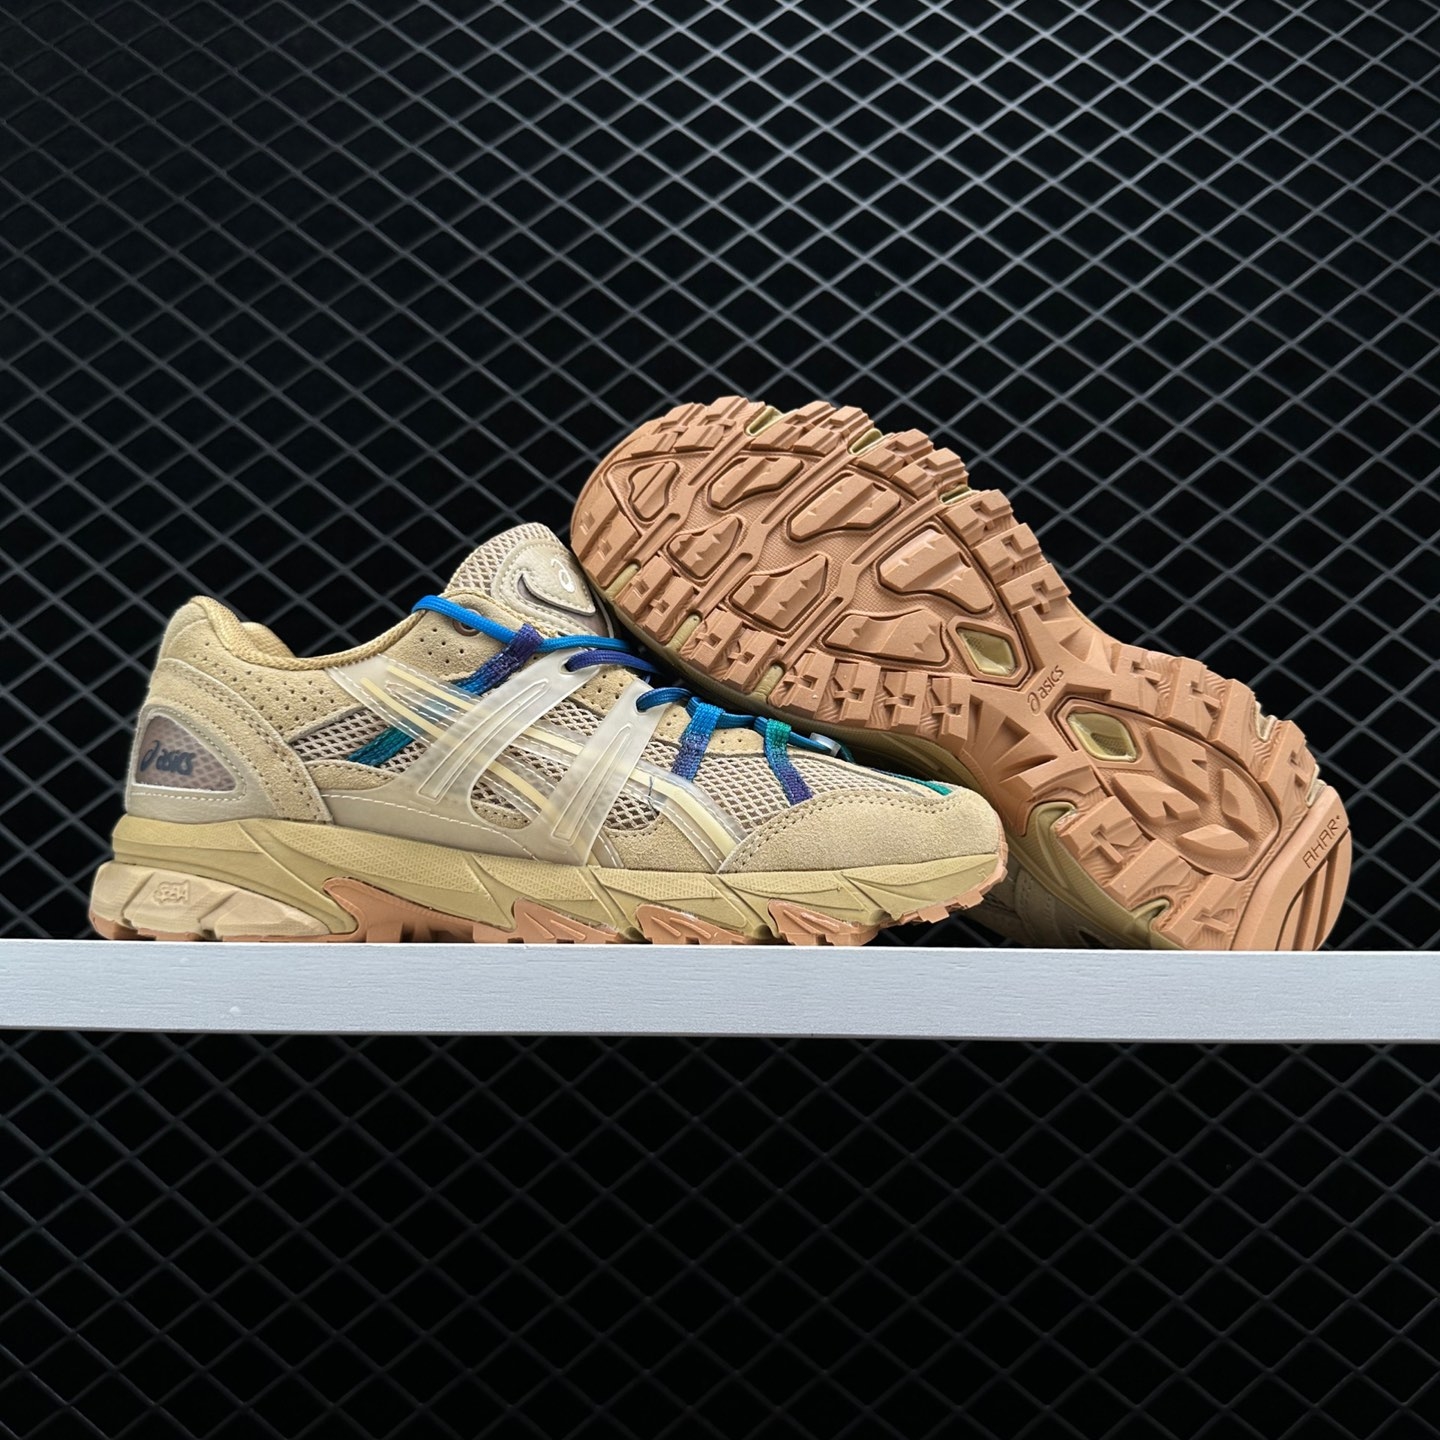 Asics Gel Sonoma 15-50 x A.P.C. Beige Blue 1203A226-200 - Trendy and Stylish Trail Running Shoes